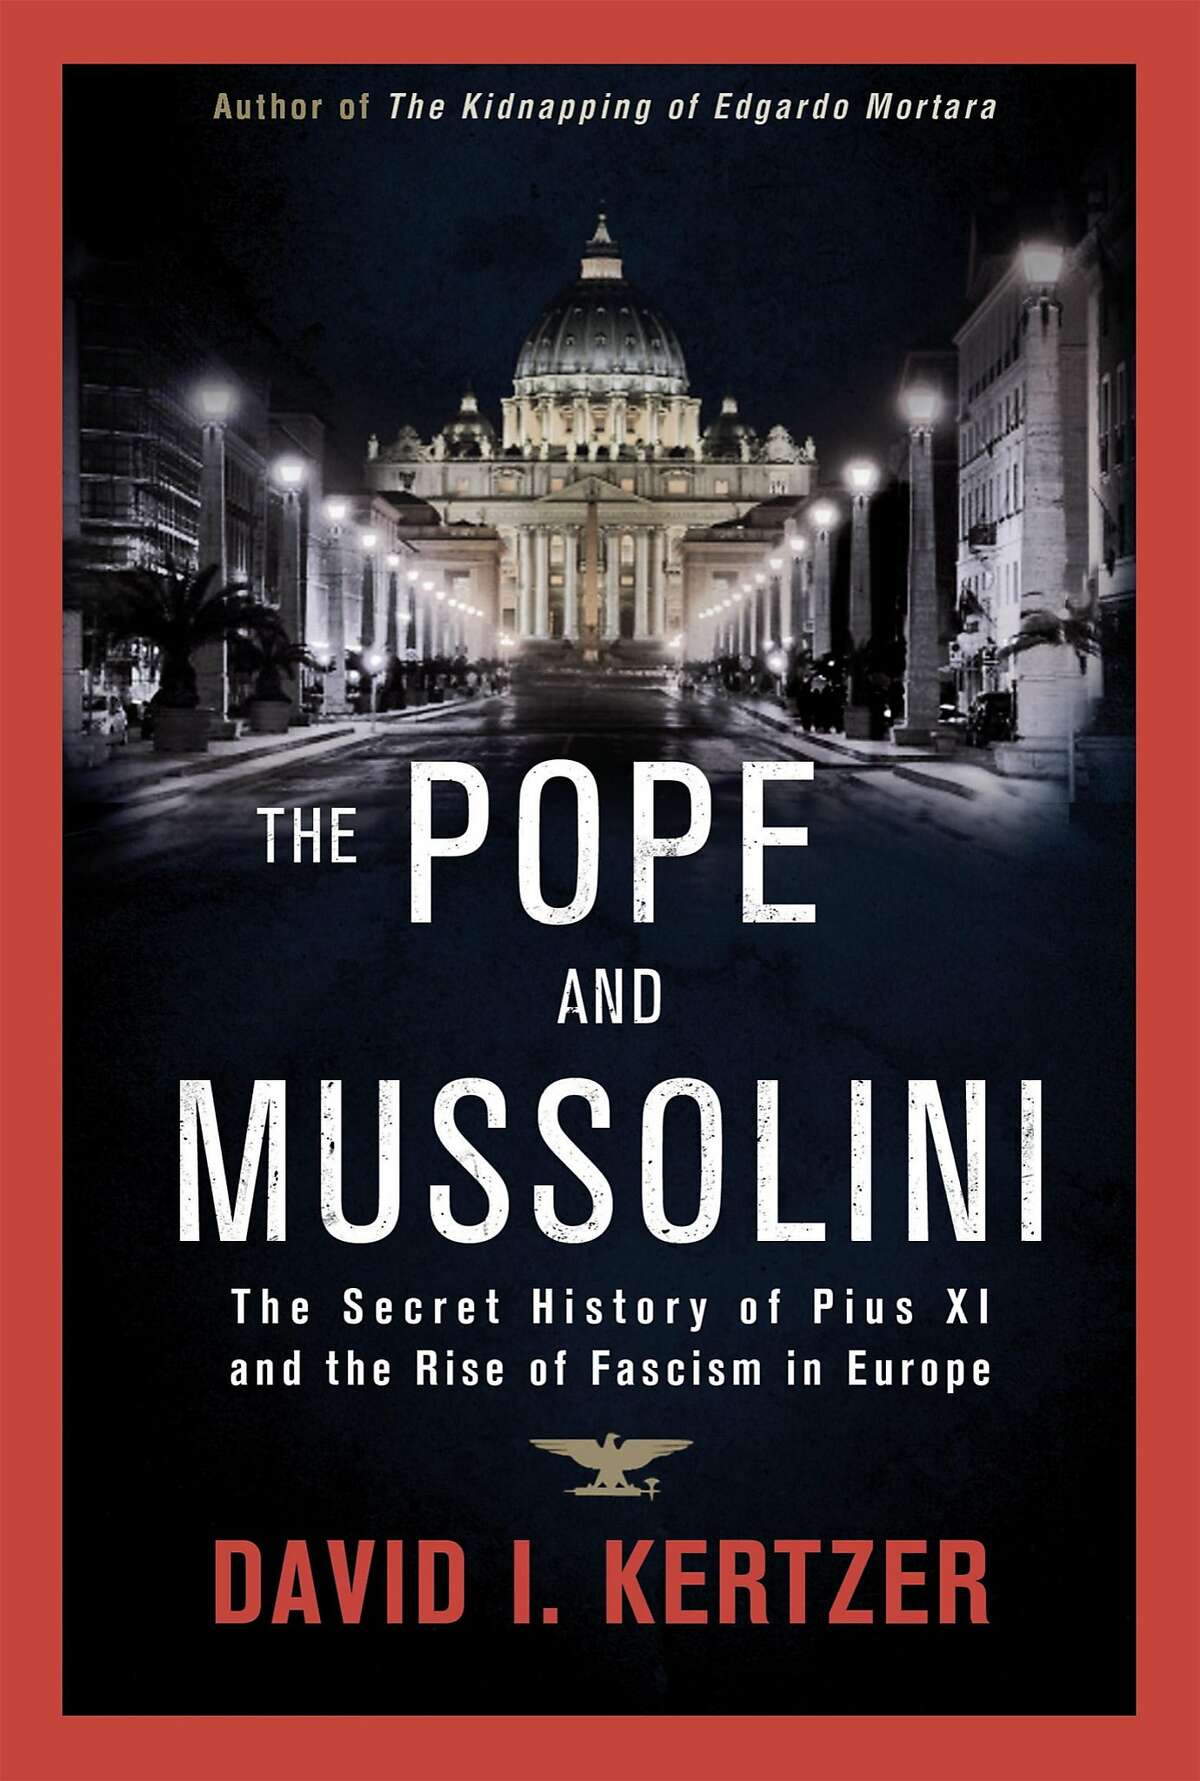 The Pope and Mussolini: The Secret History of Pius XI and the Rise of Fascism in Europe, by David Kertzer